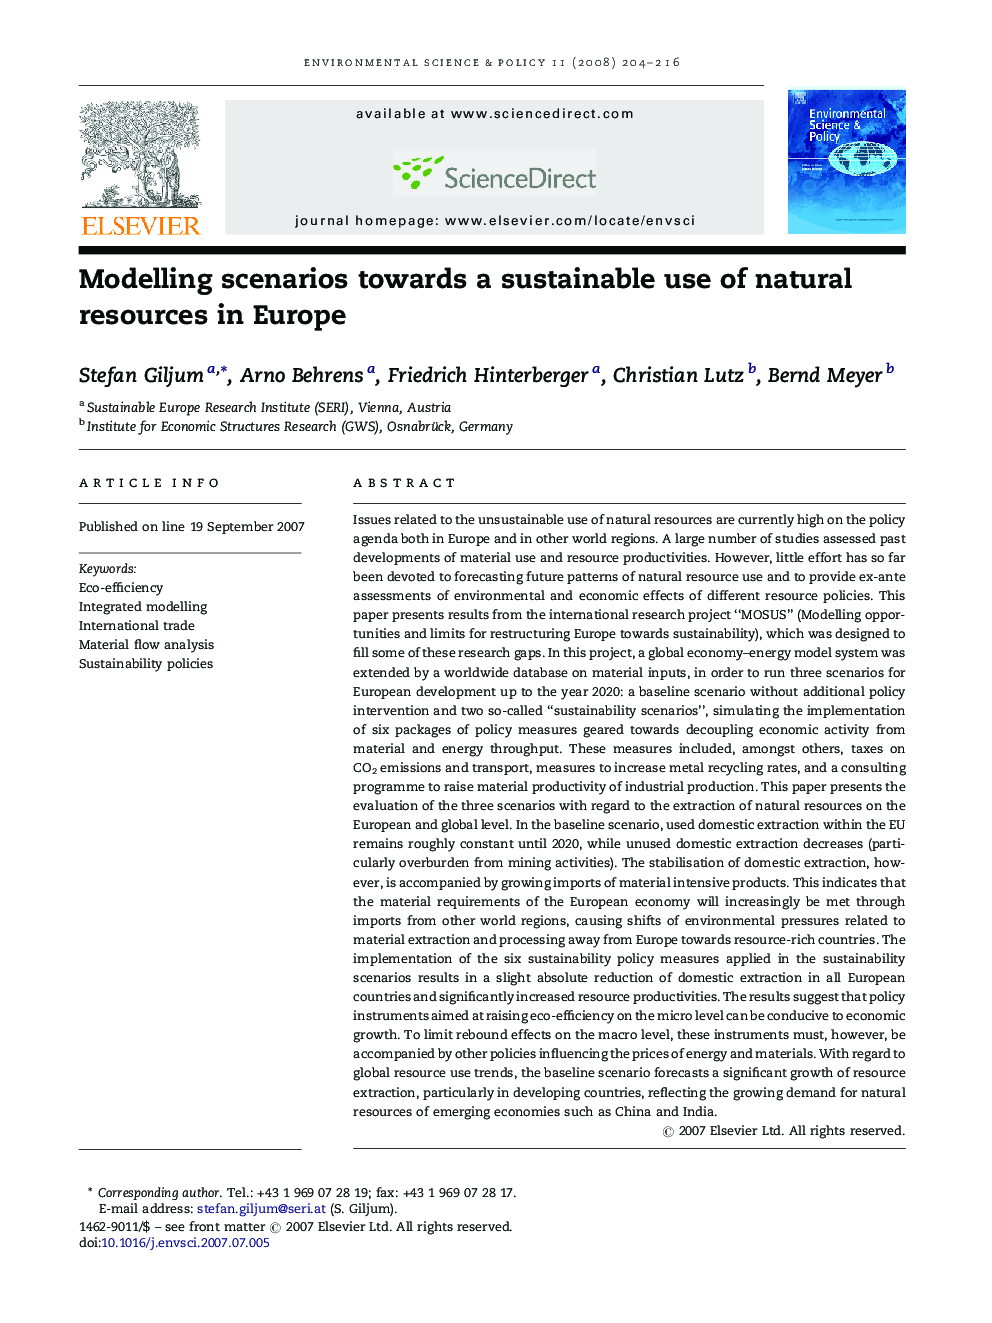 Modelling scenarios towards a sustainable use of natural resources in Europe